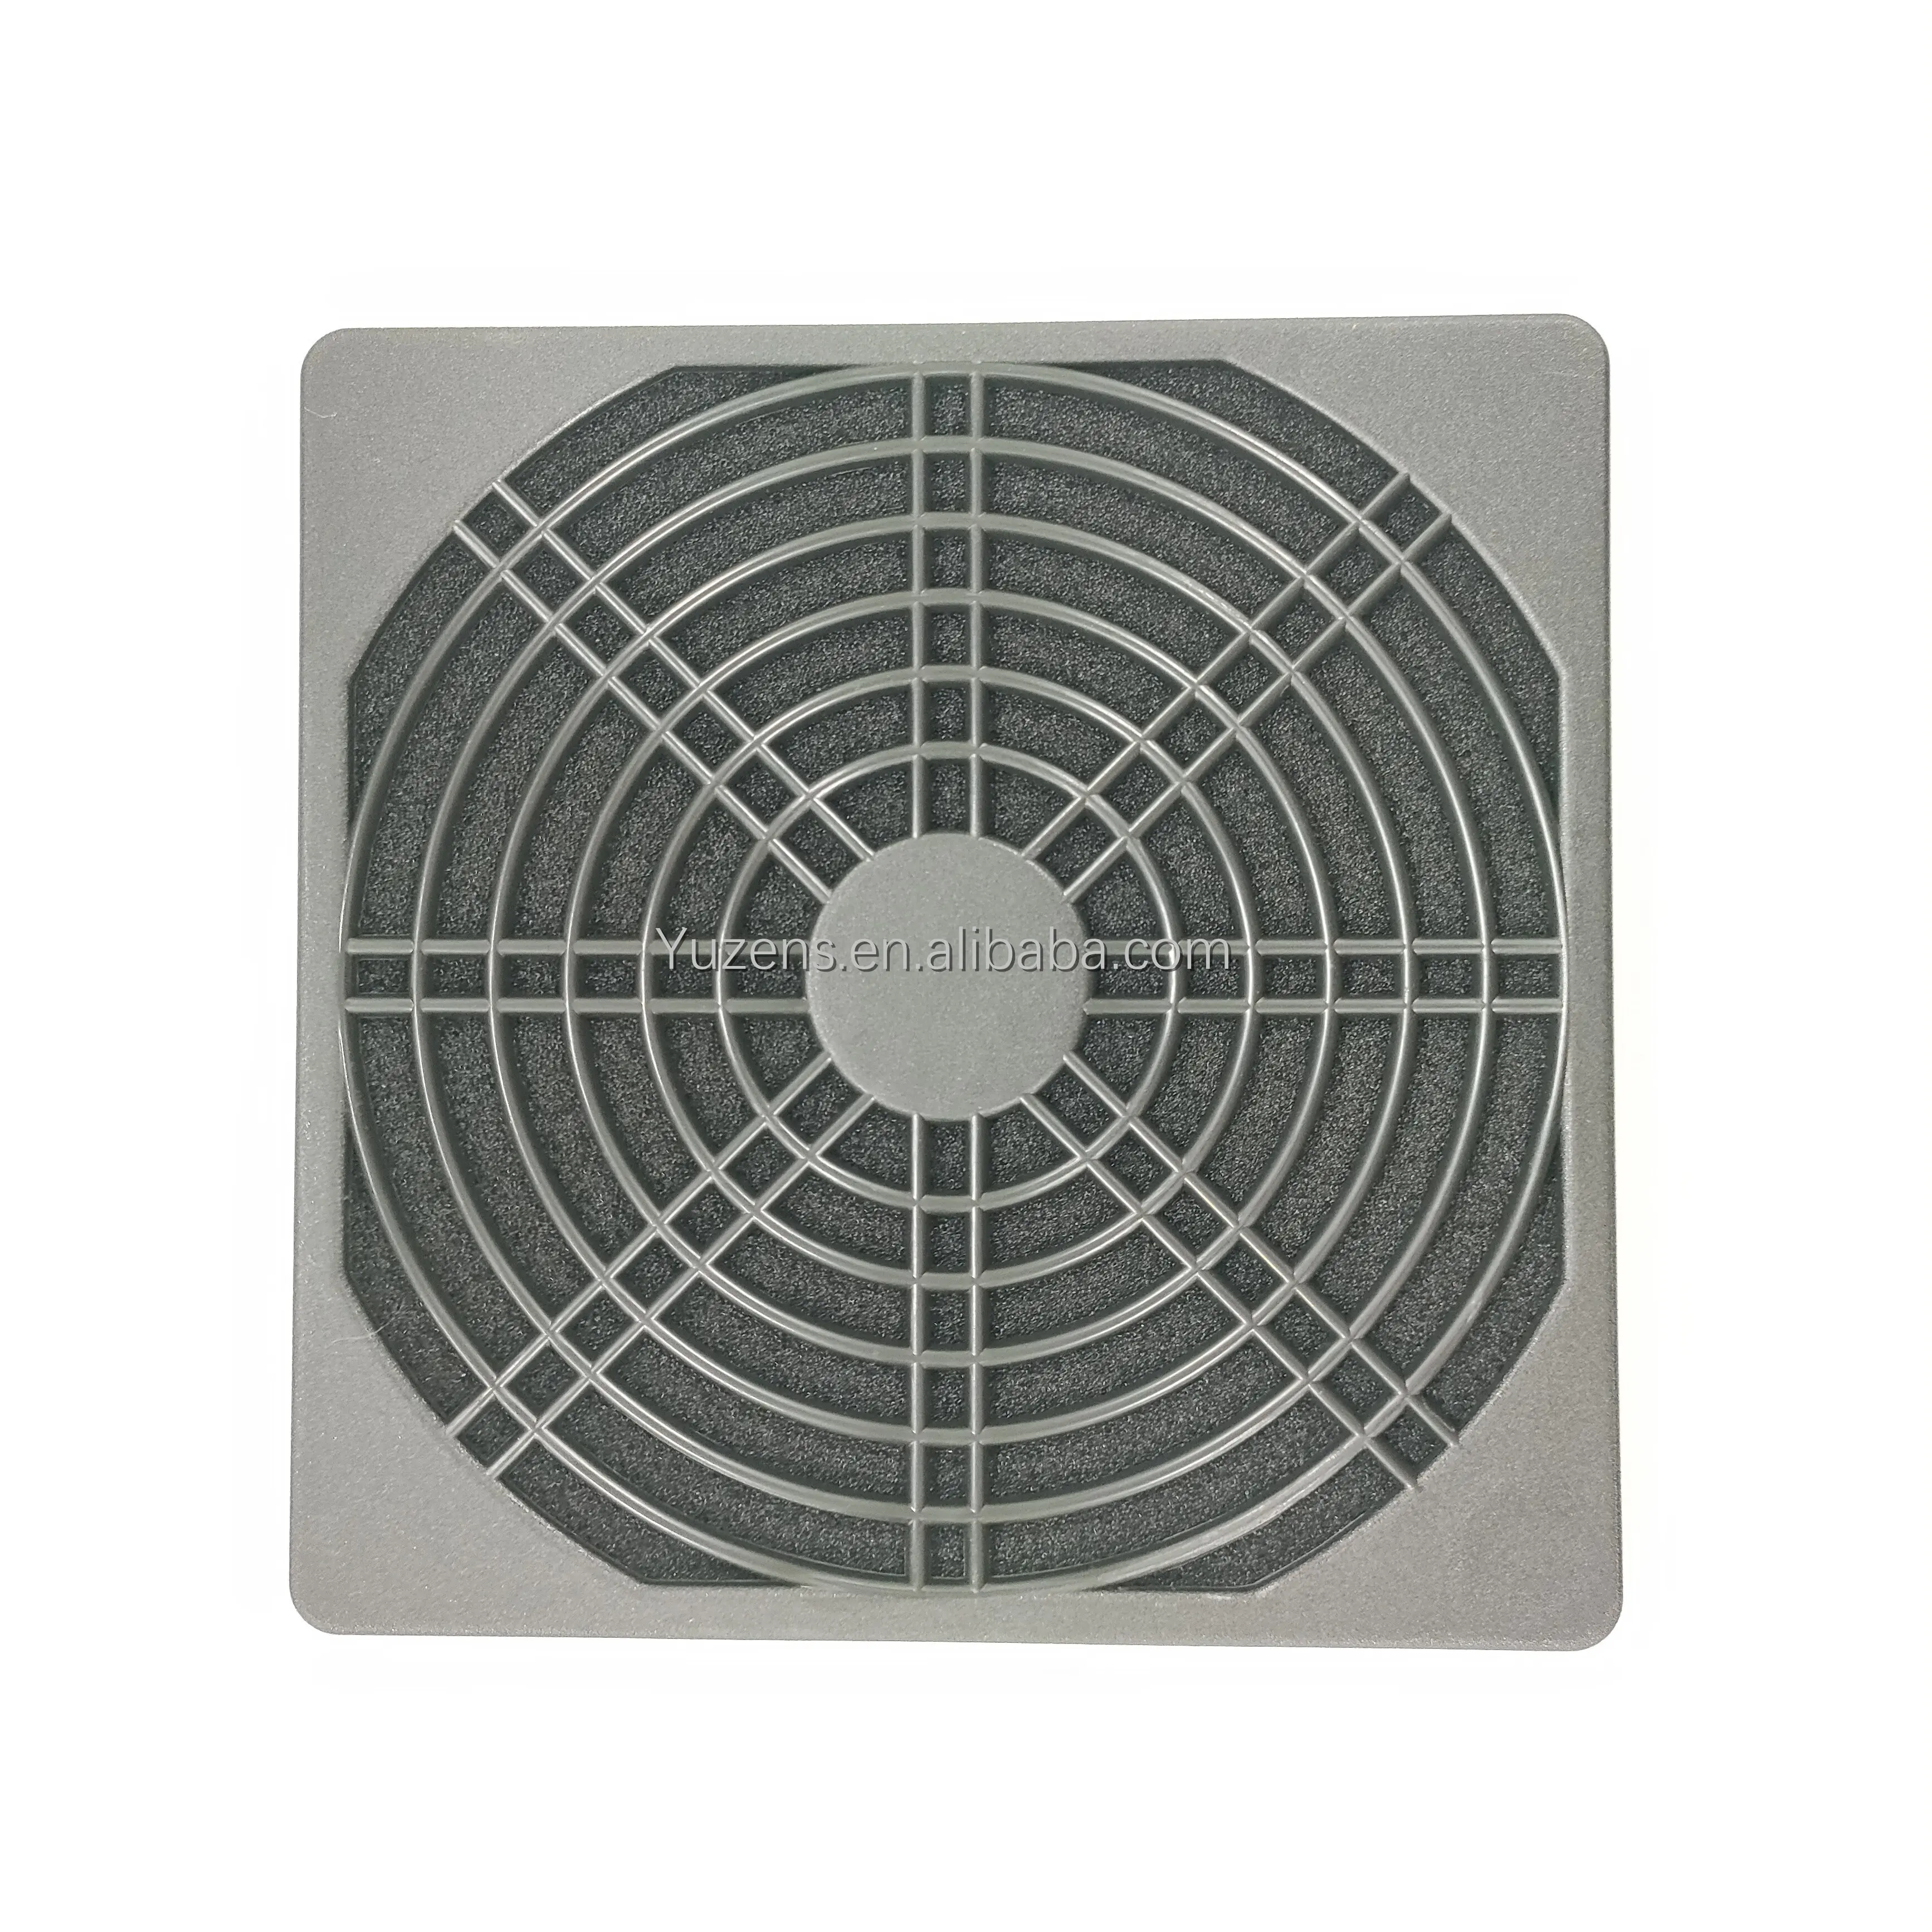 Three-in-one Mesh Cover Shutters Axial Flow Fan 12038 Fan Dust-Proof Mesh Cover 120 Ventilation Dilter Mesh Set